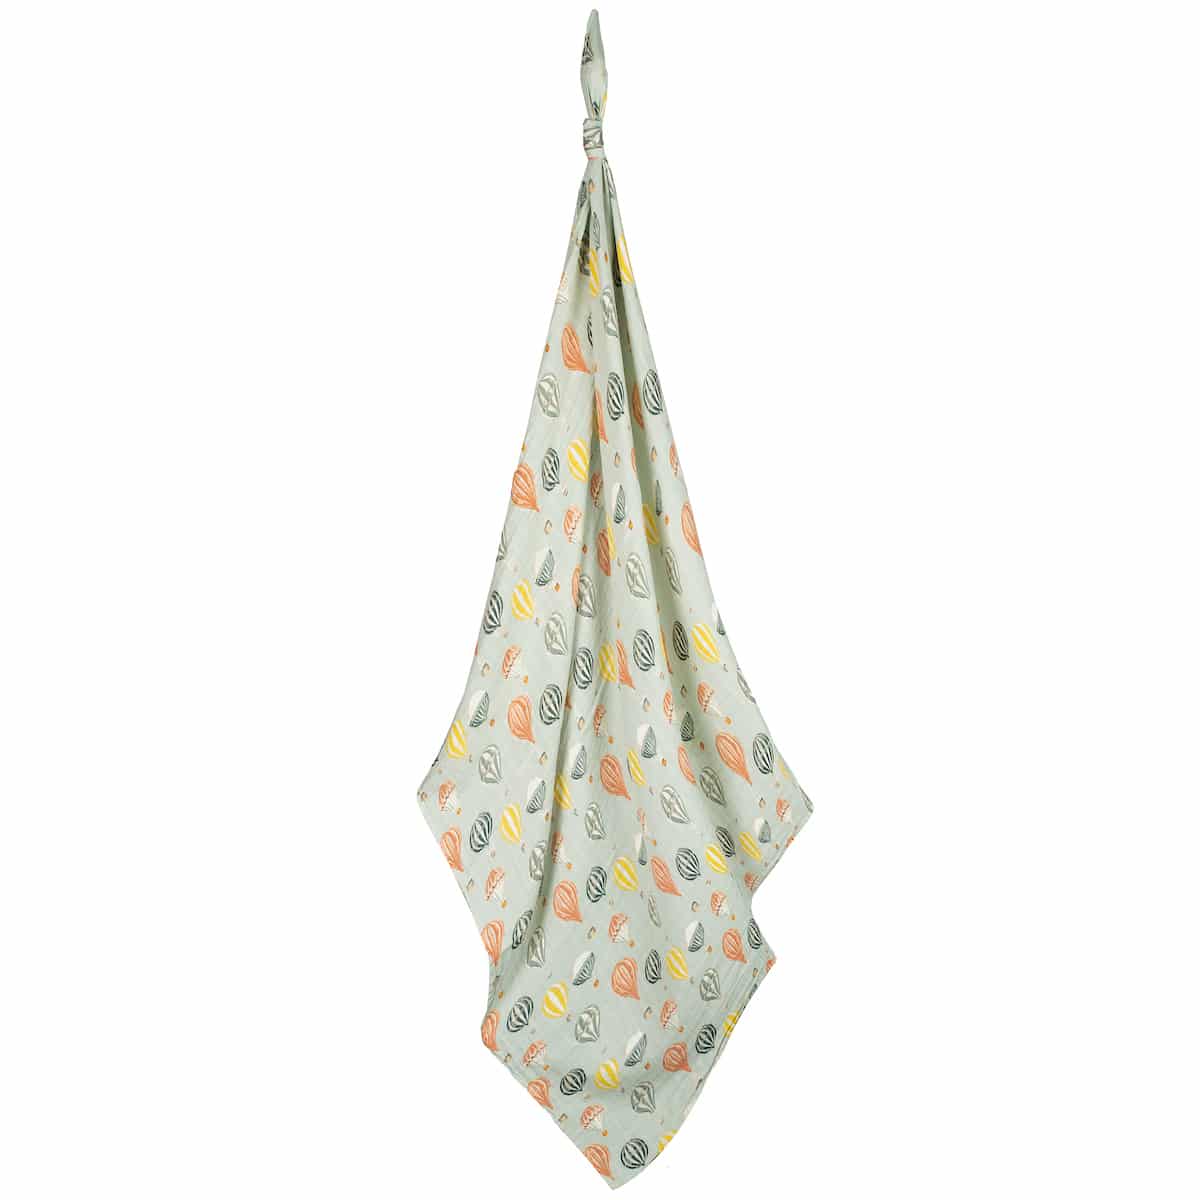 Vintage Balloons Swaddle